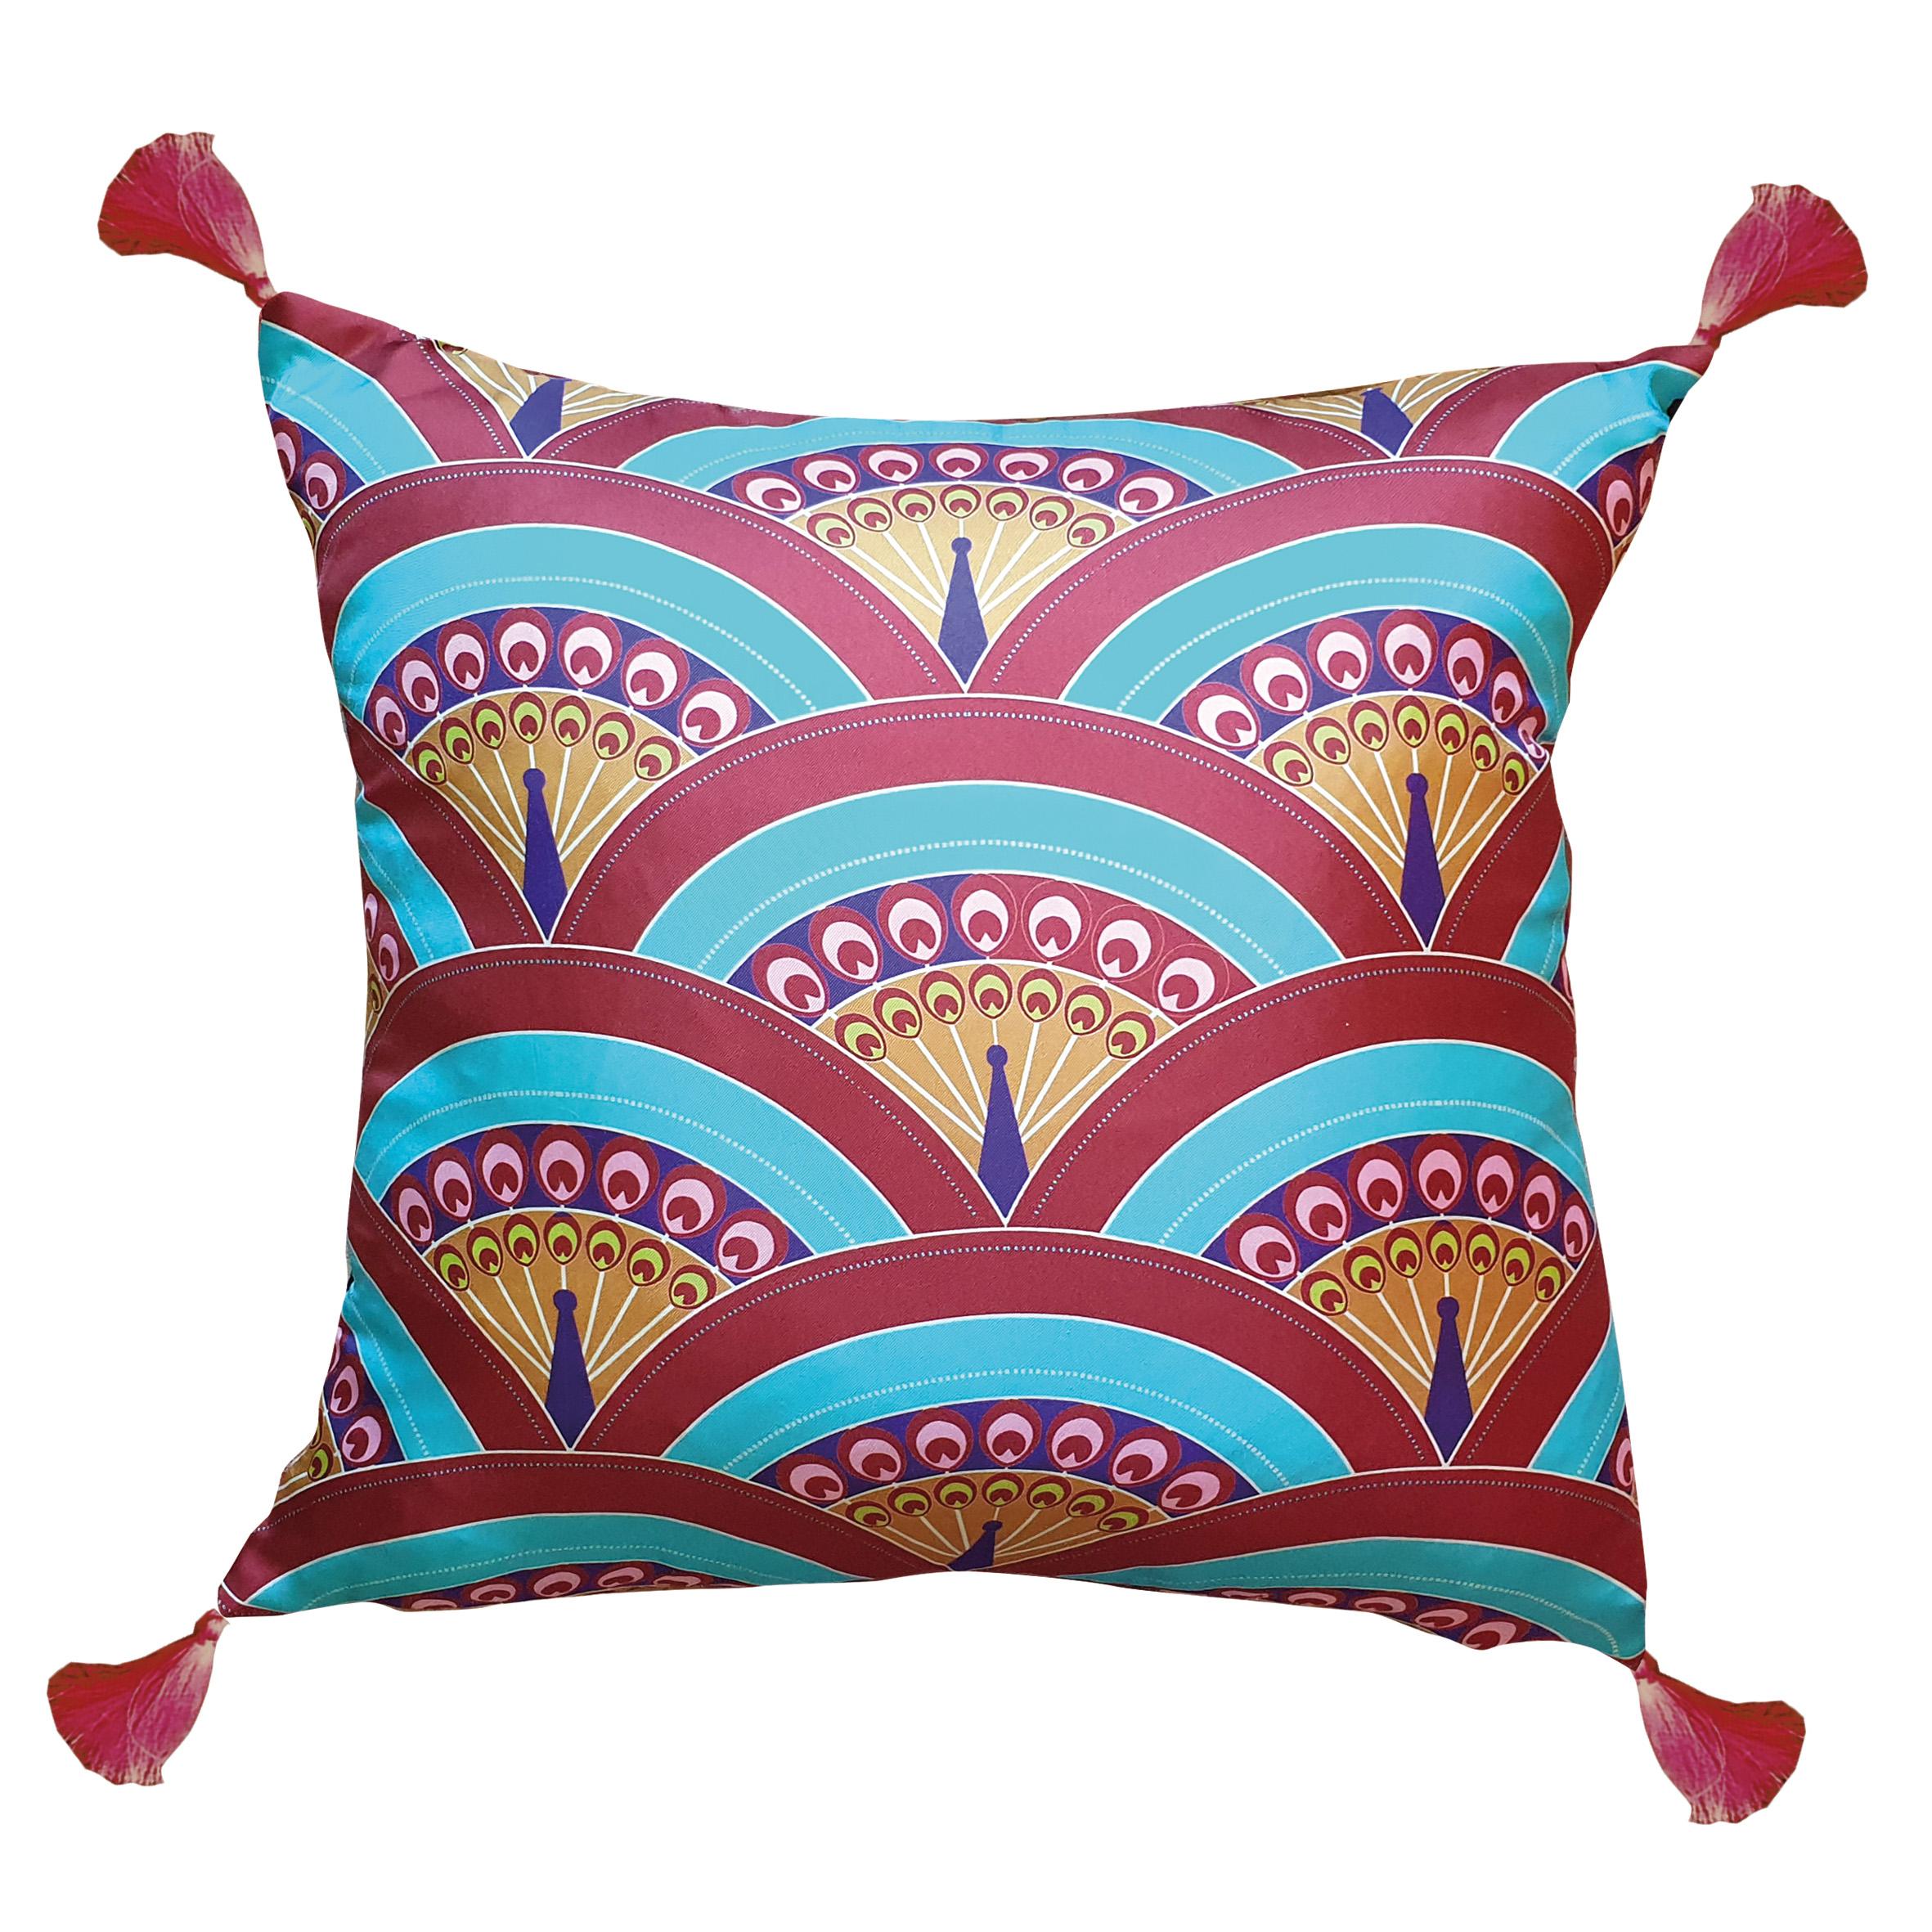 Contemporary Les Ottomans, Peacoch 'Silk Cushion' by Matthew Williamson For Sale